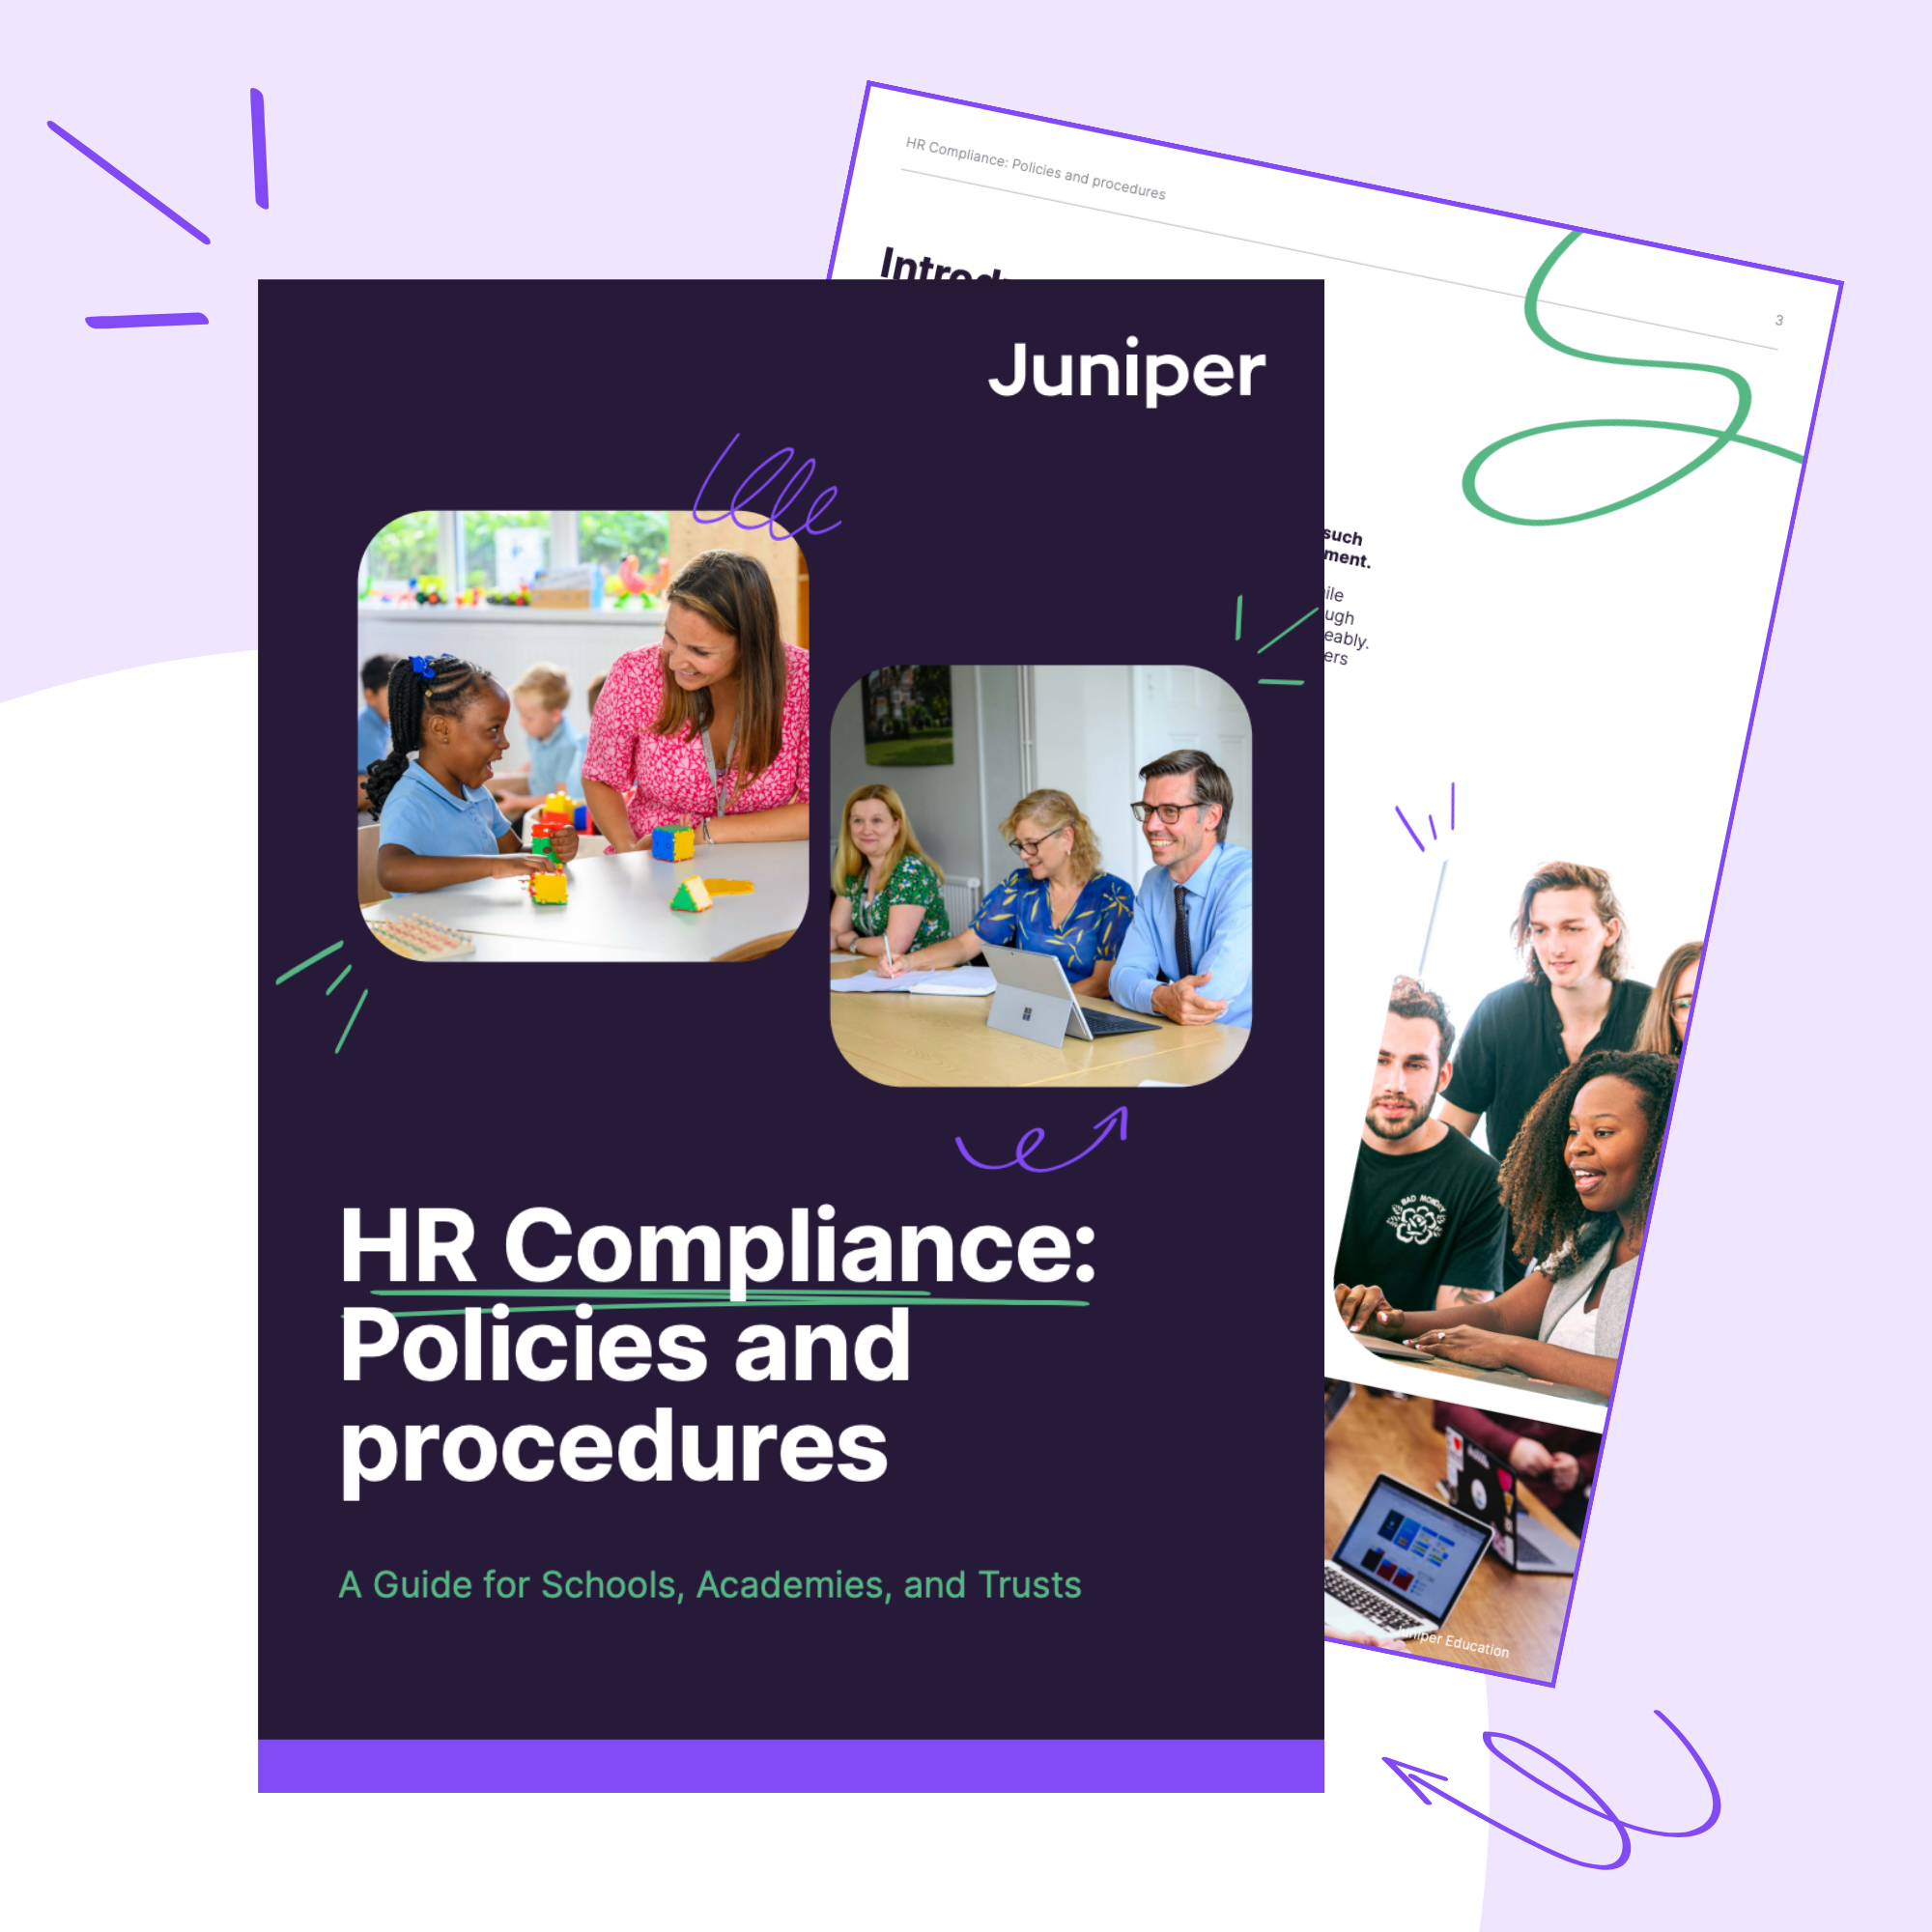 HR Policies and procedures guide